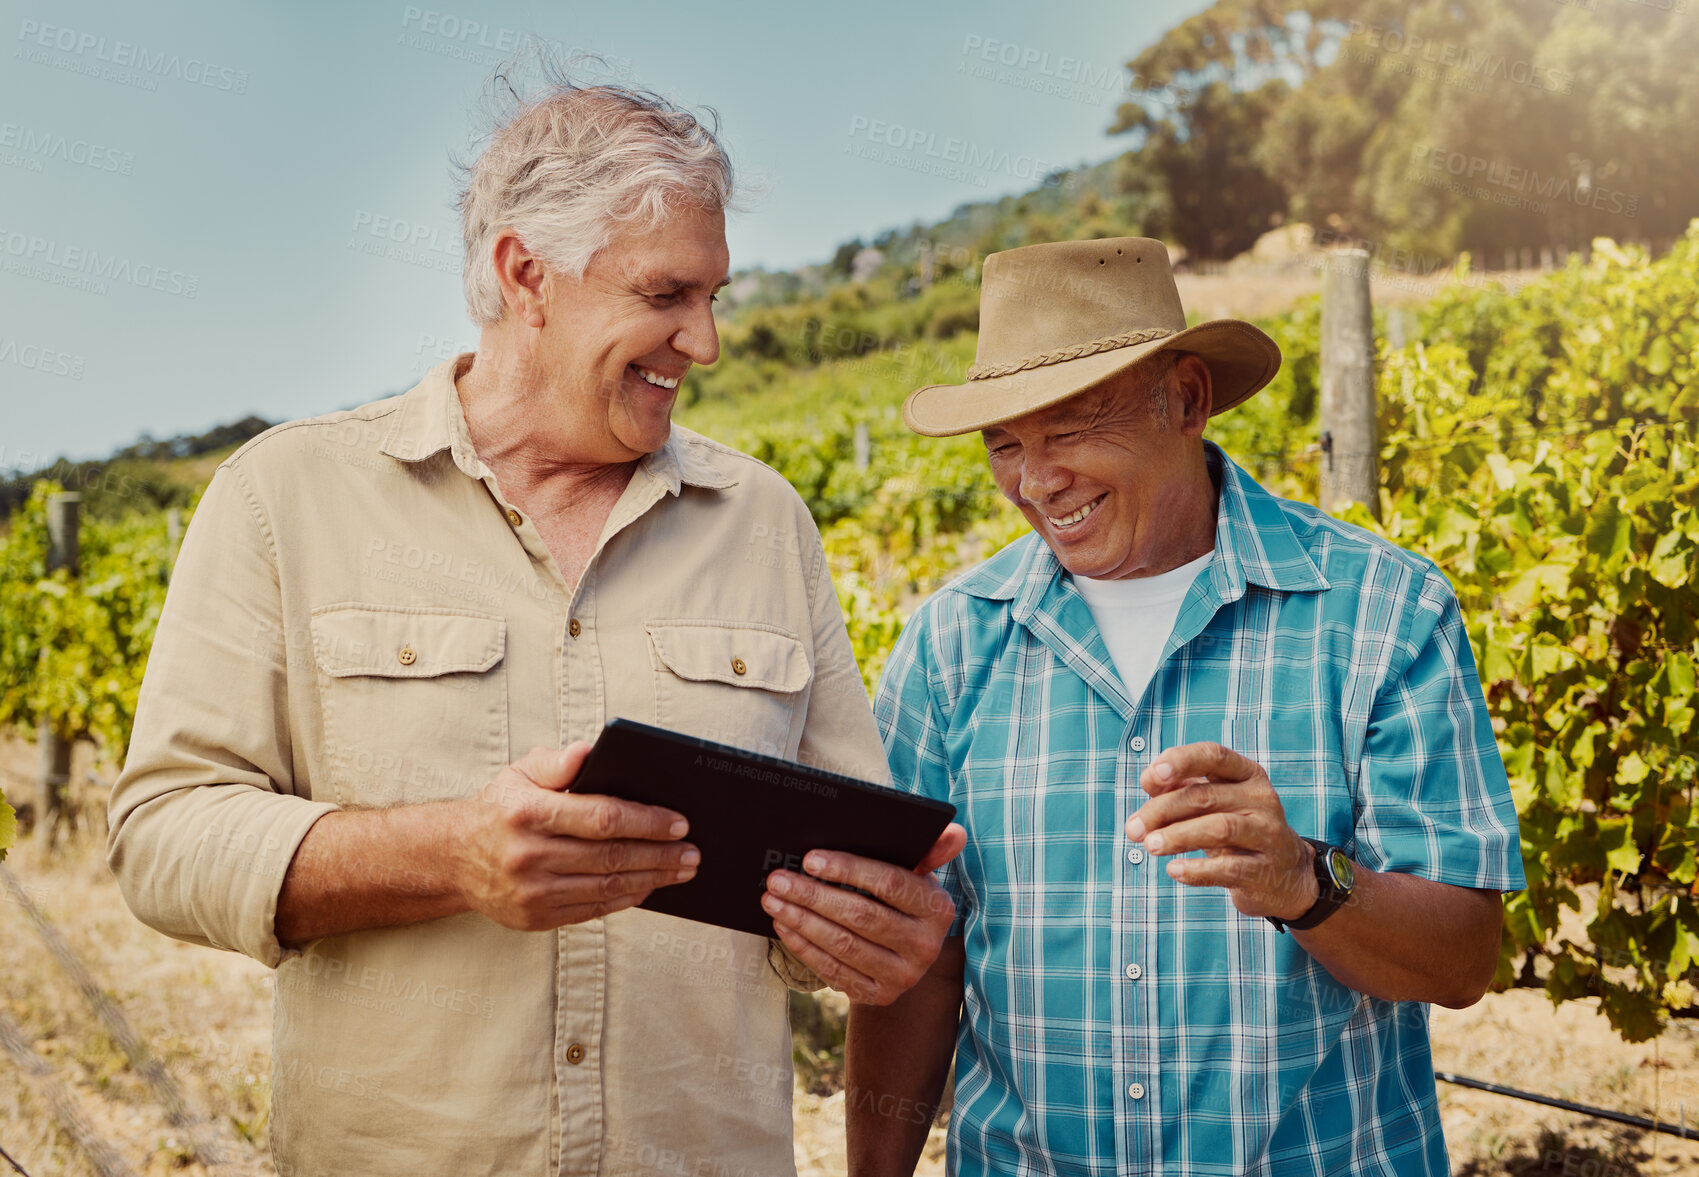 Buy stock photo Two happy senior farmers standing and talking while using a digital tablet on their vineyard. Smiling elderly men and colleagues bonding and laughing together on a wine farm in summer before harvest